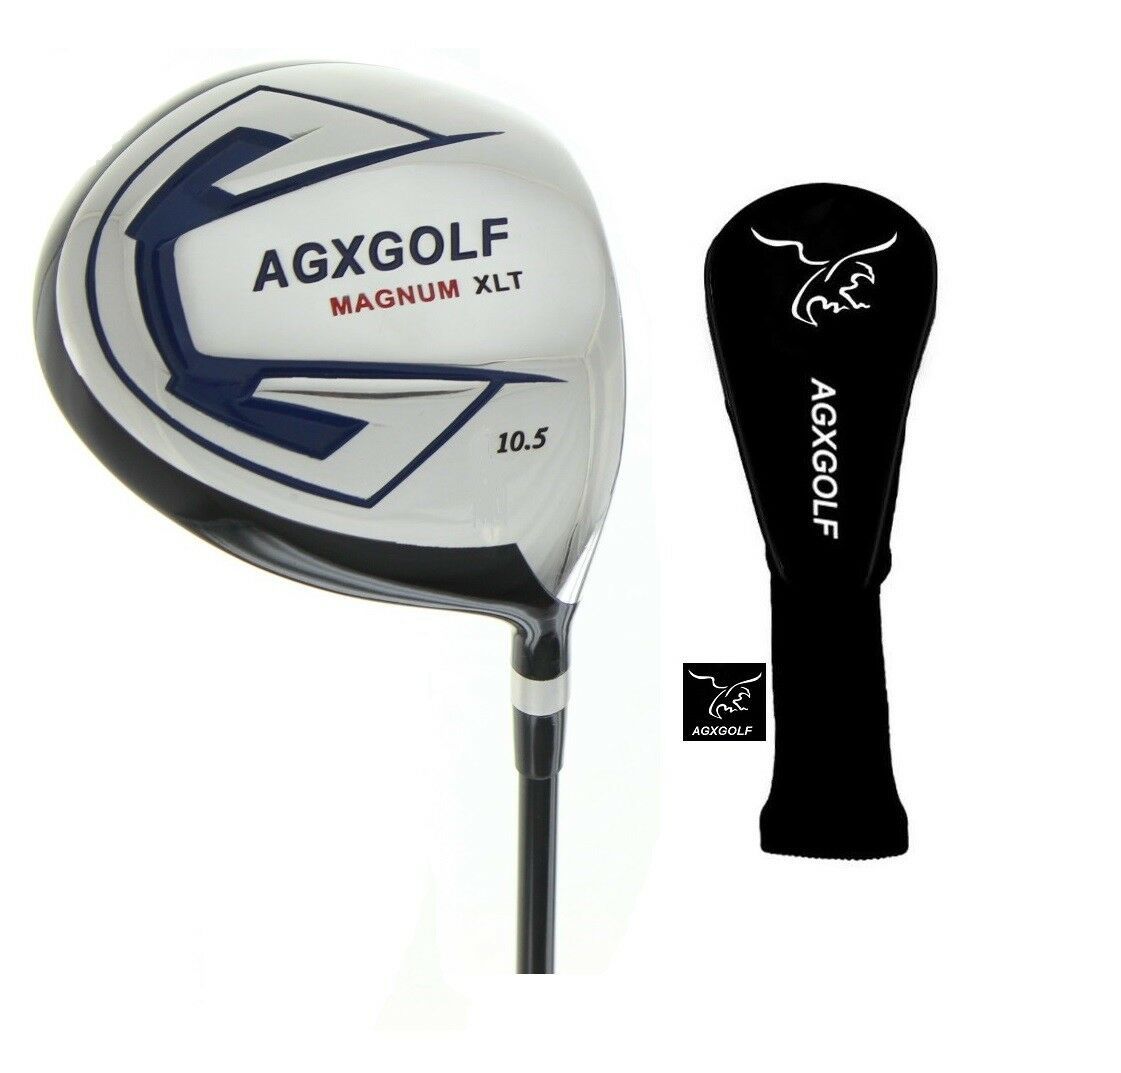 Are agx golf clubs  any good? – is it  a good brand?